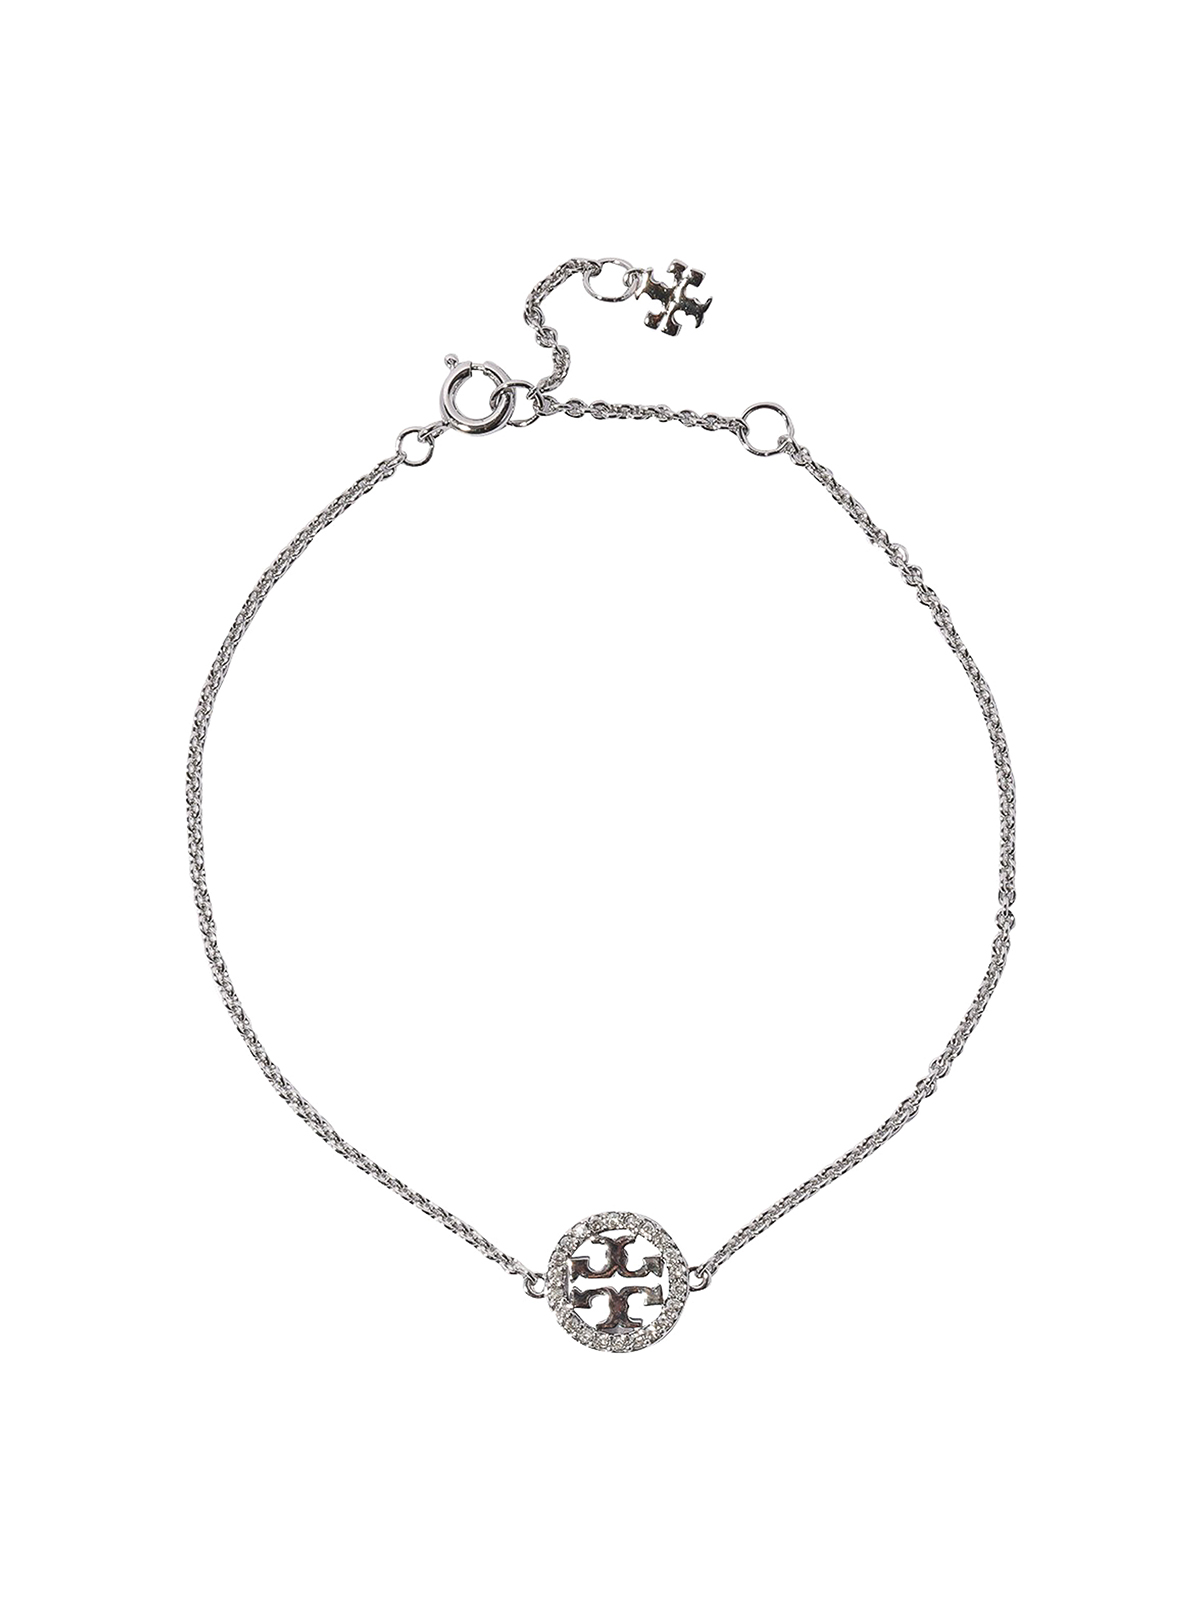 Necklaces & Chokers Tory Burch - Silver tone necklace with charm and  crystals - 80997042